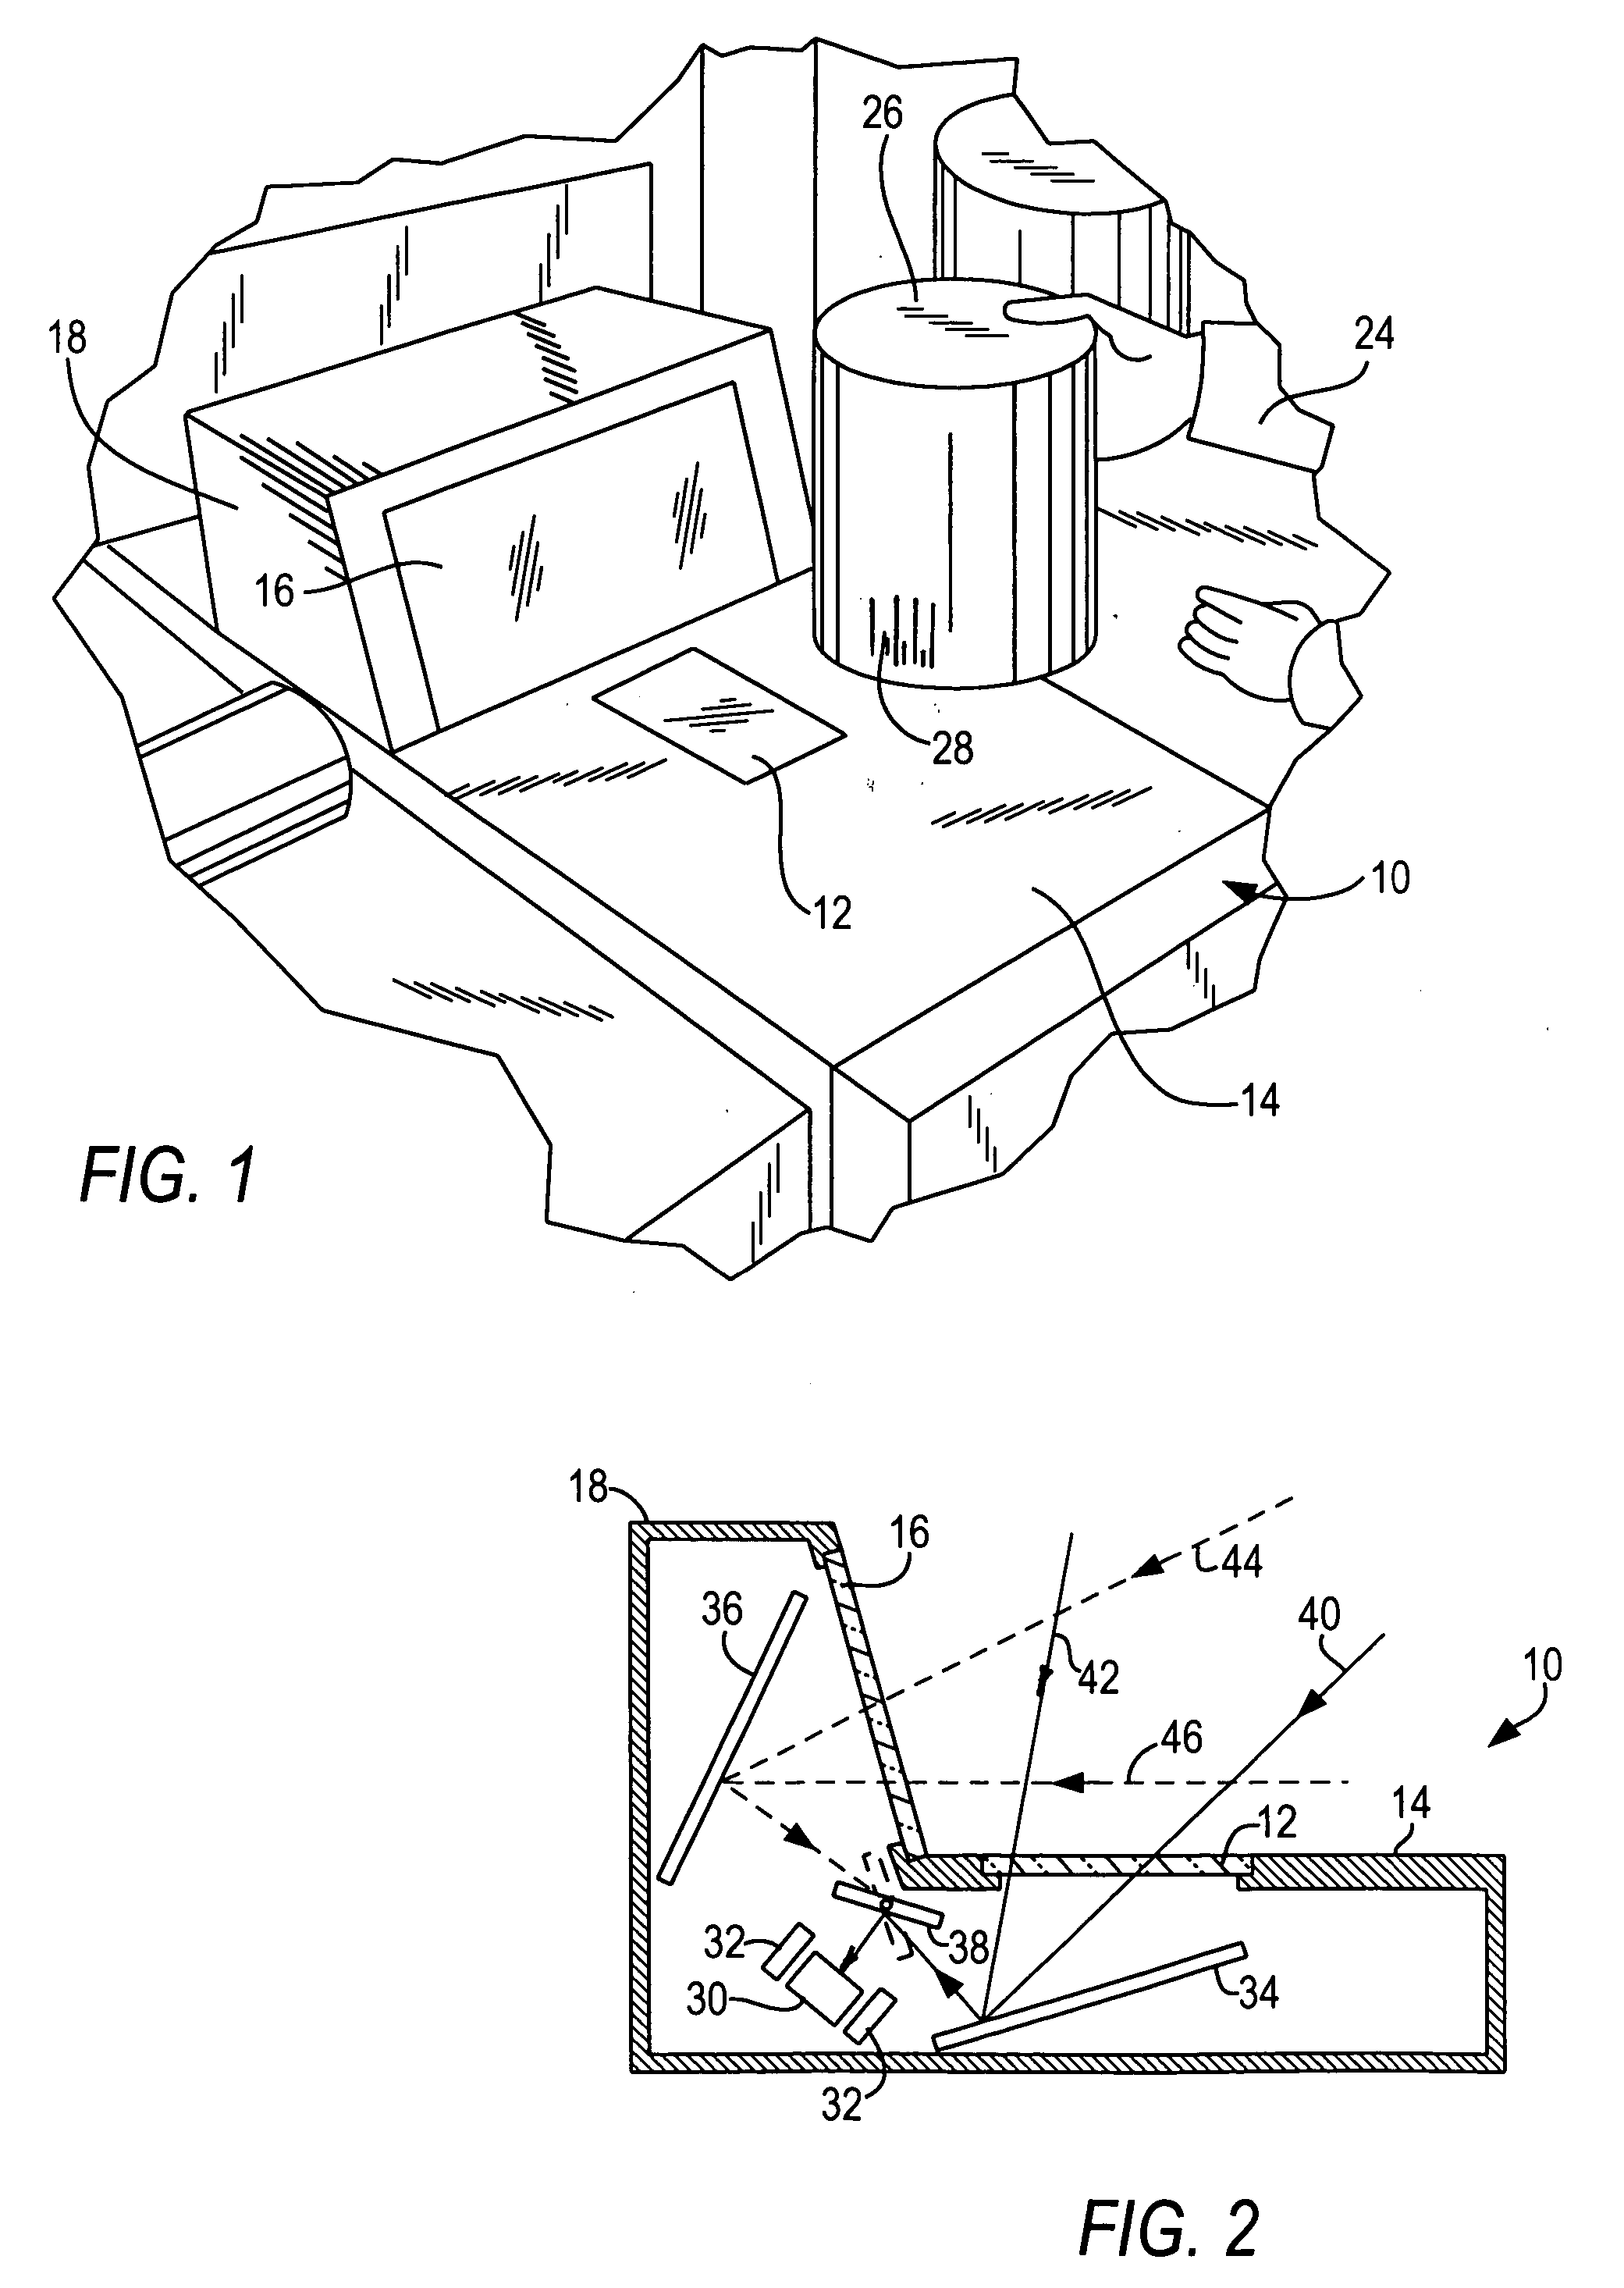 Point-of-transaction workstation for electro-optically reading one-dimensional and two-dimensional indicia by image capture